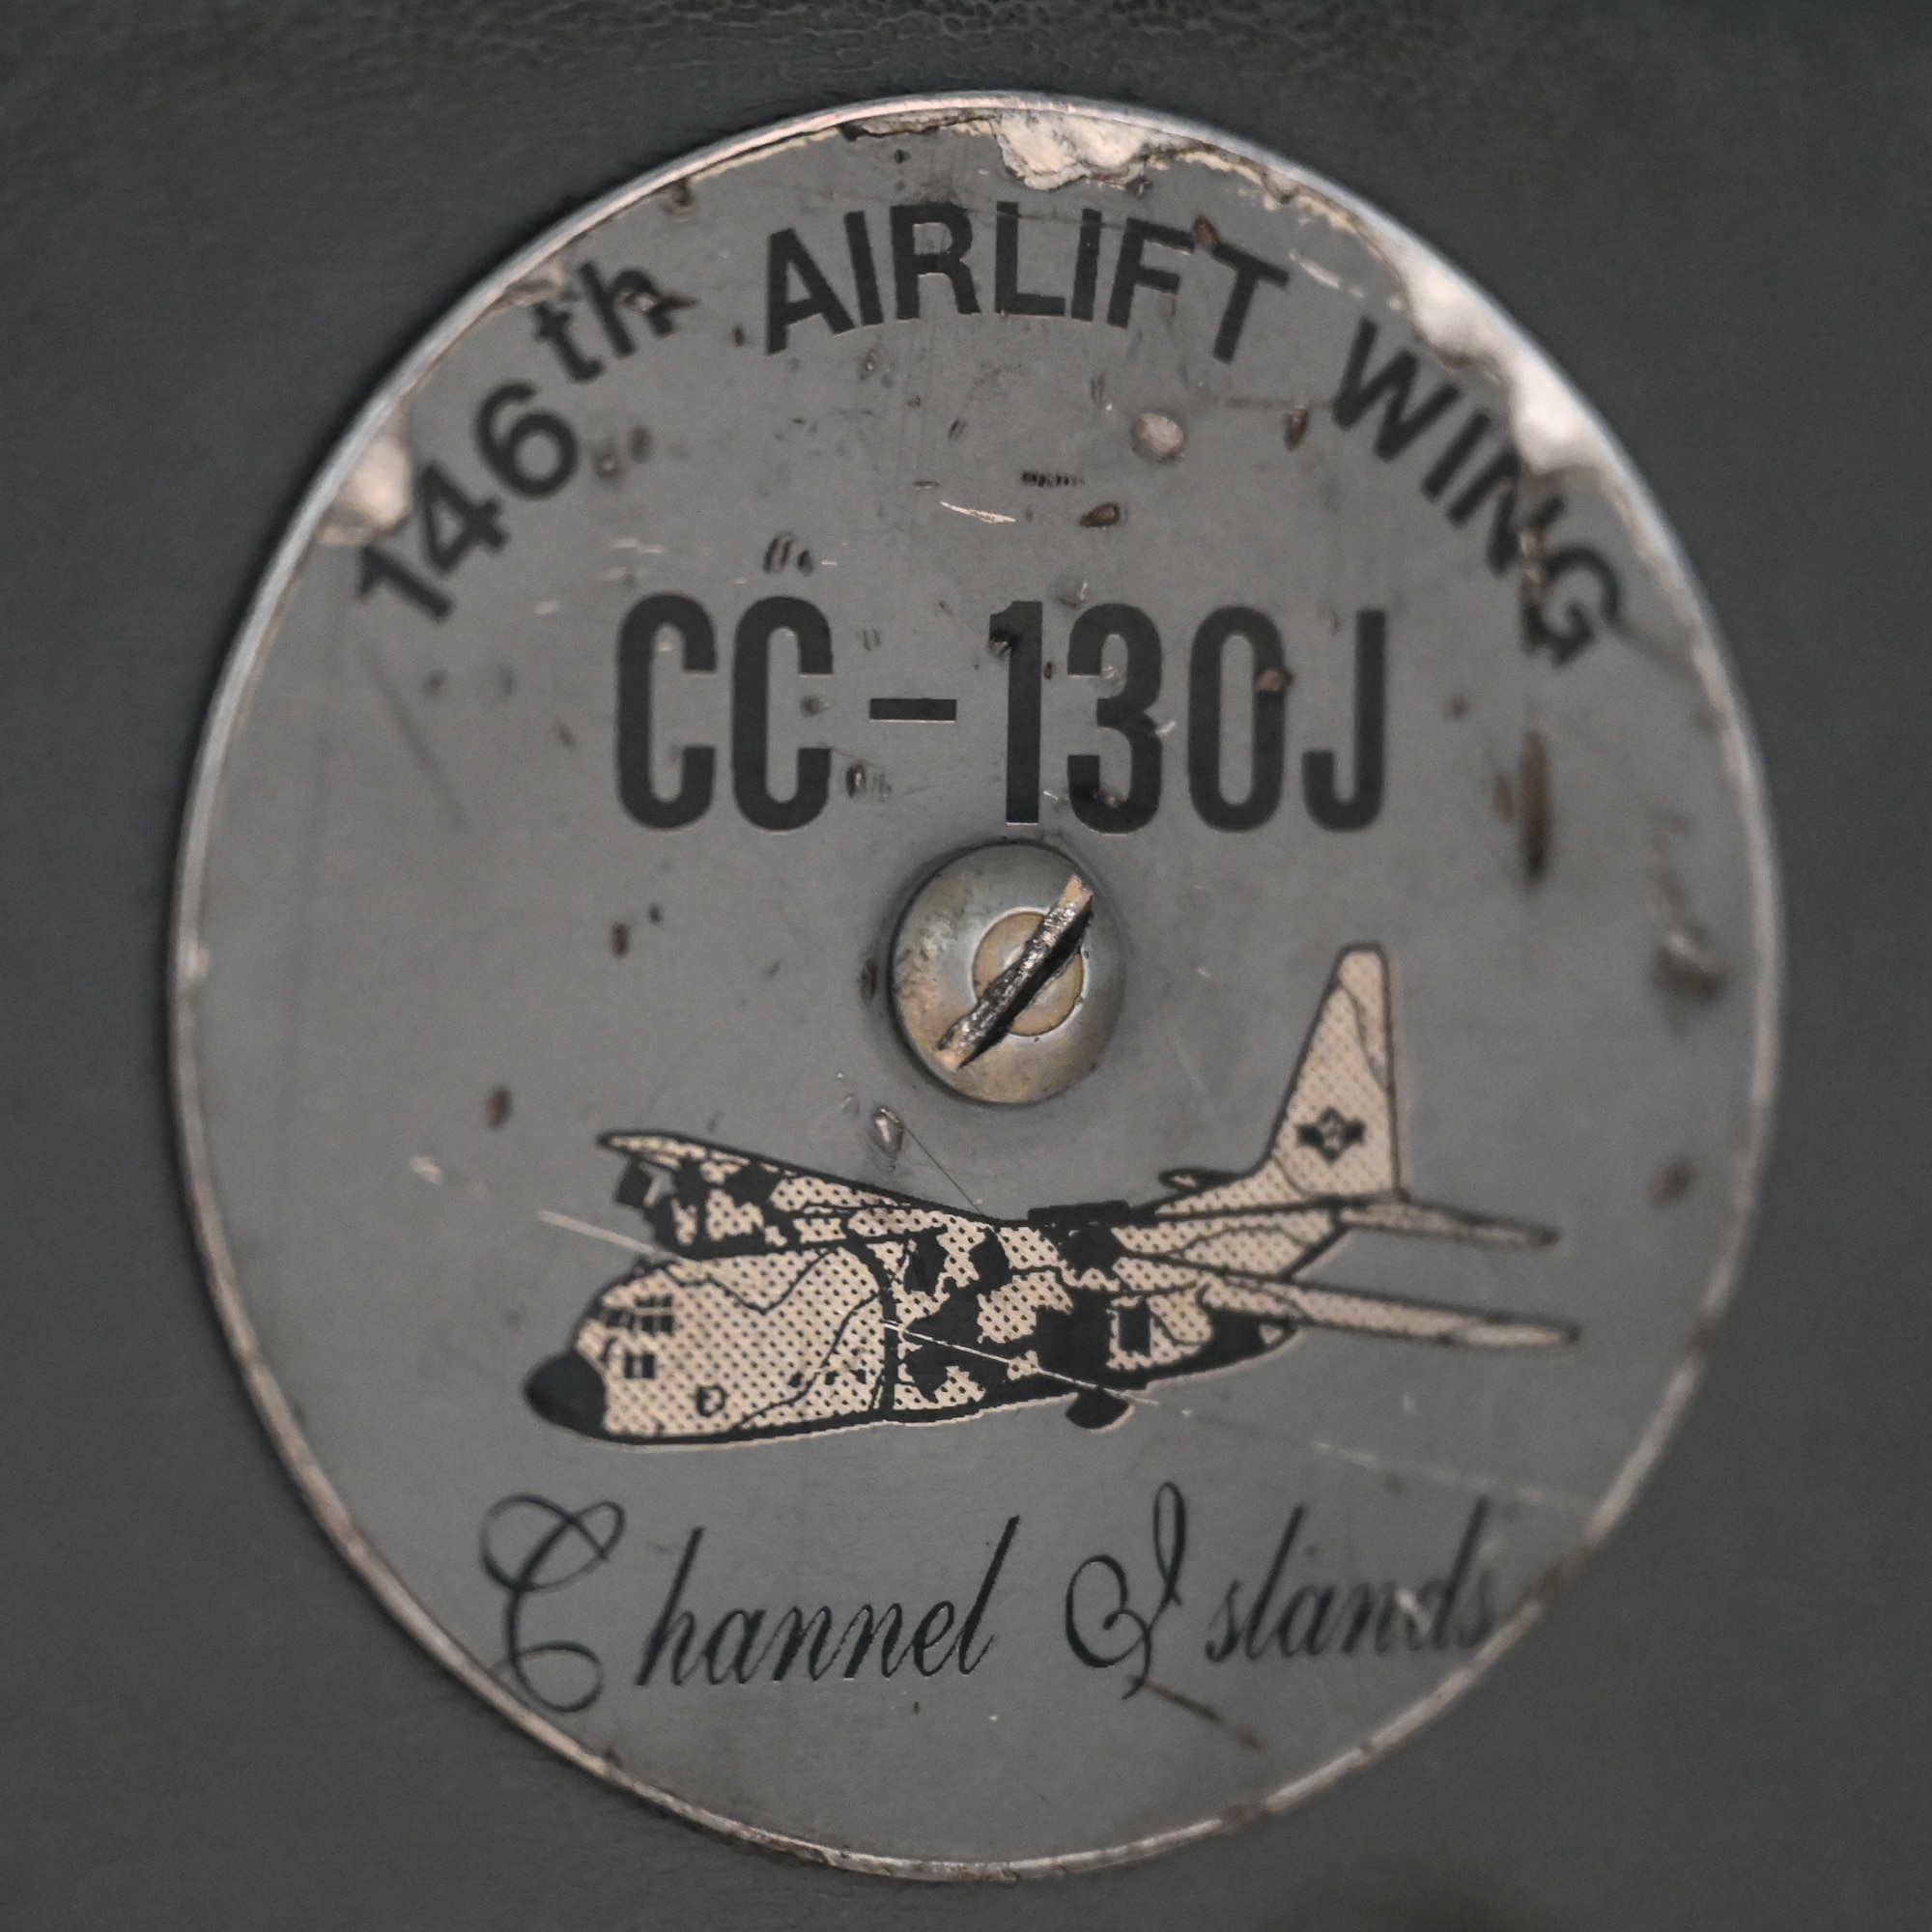 An aircraft insignia bolted to a seat, tattered.